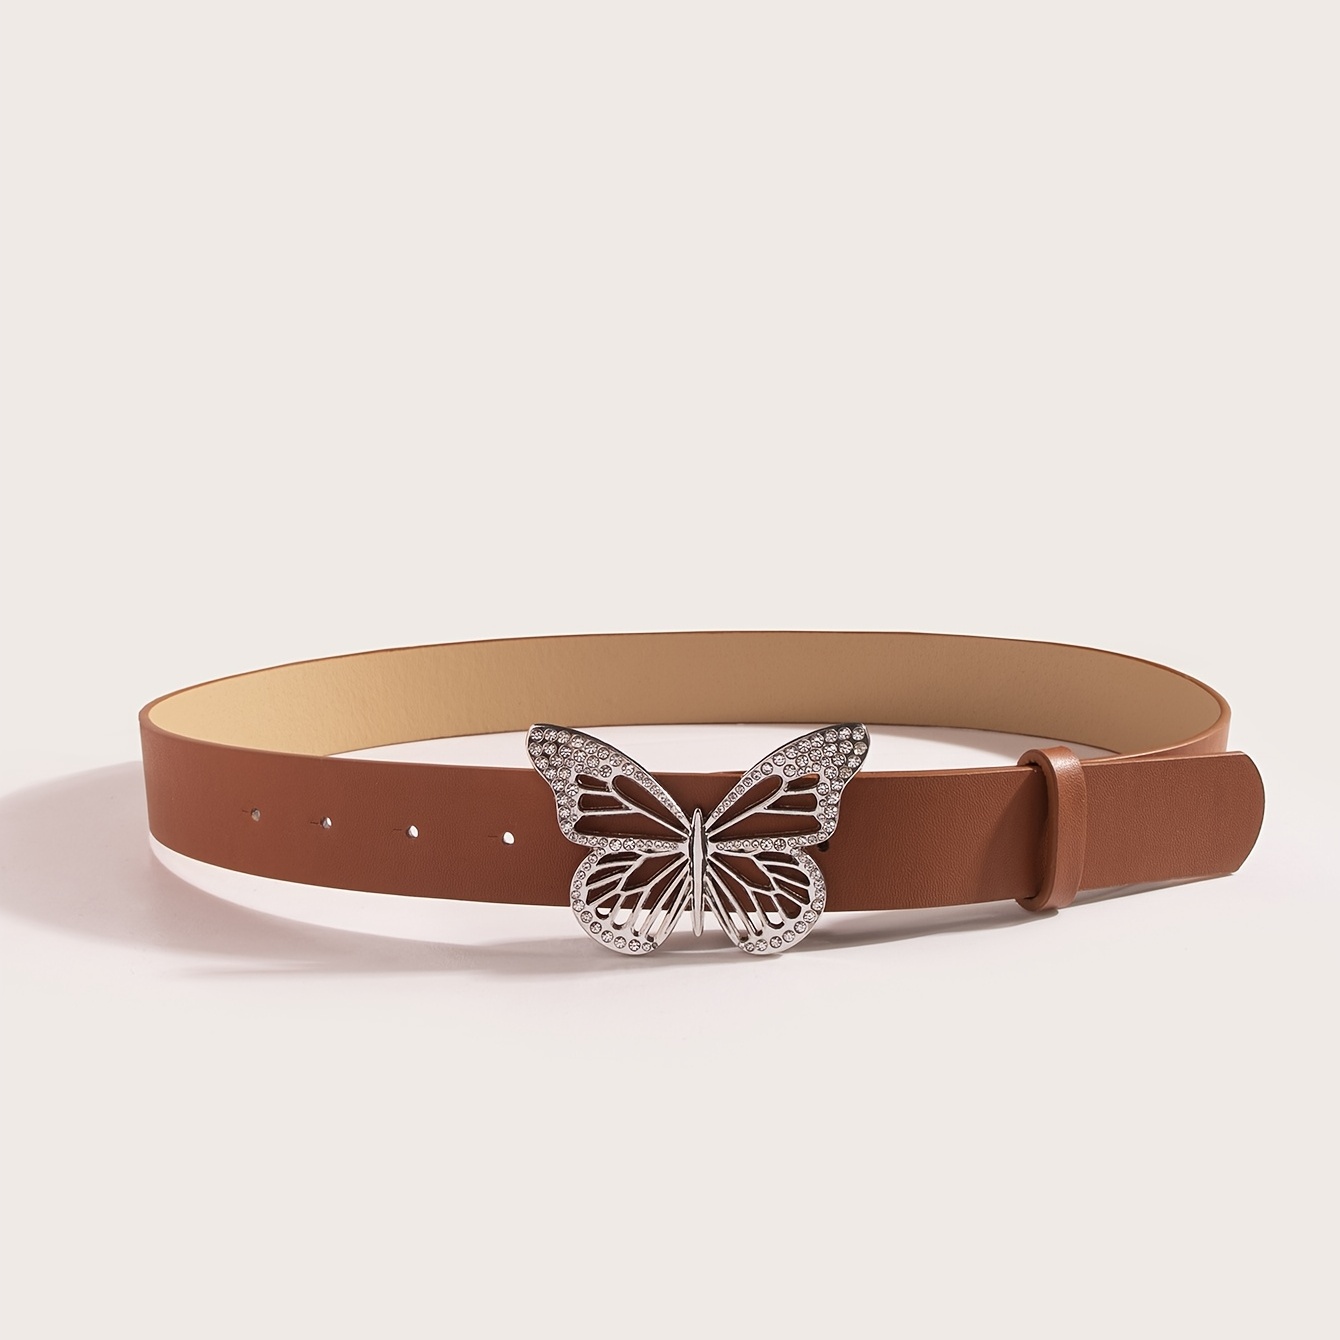 Women Belts Fashion Soft Leather Belts With Butterfly Buckle